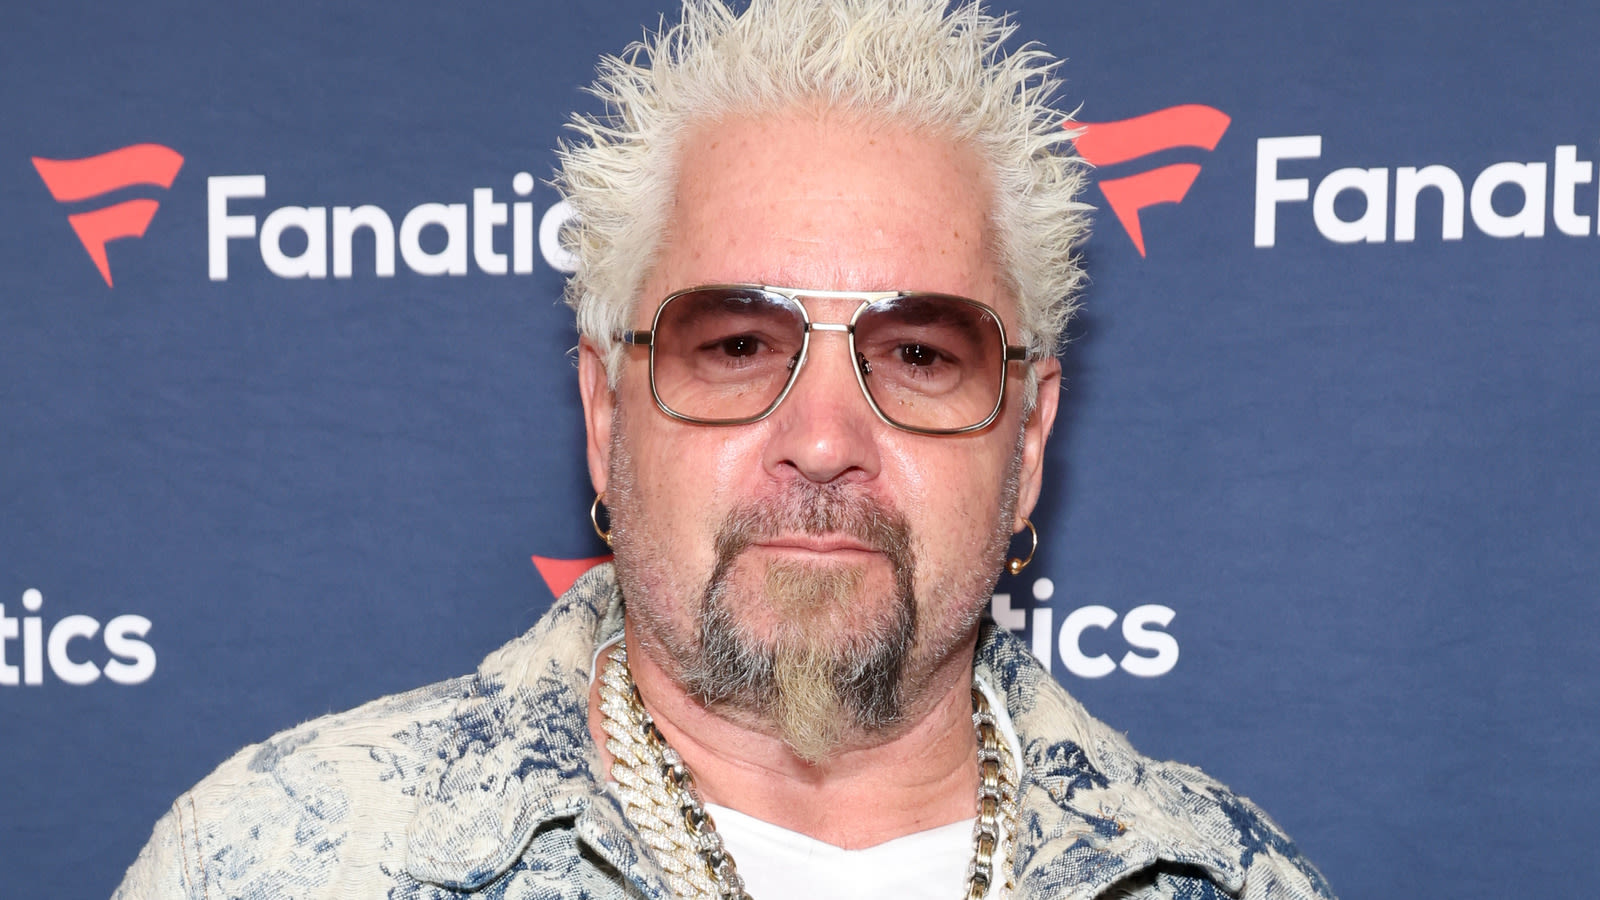 The Most Tragic Things About Guy Fieri's Life